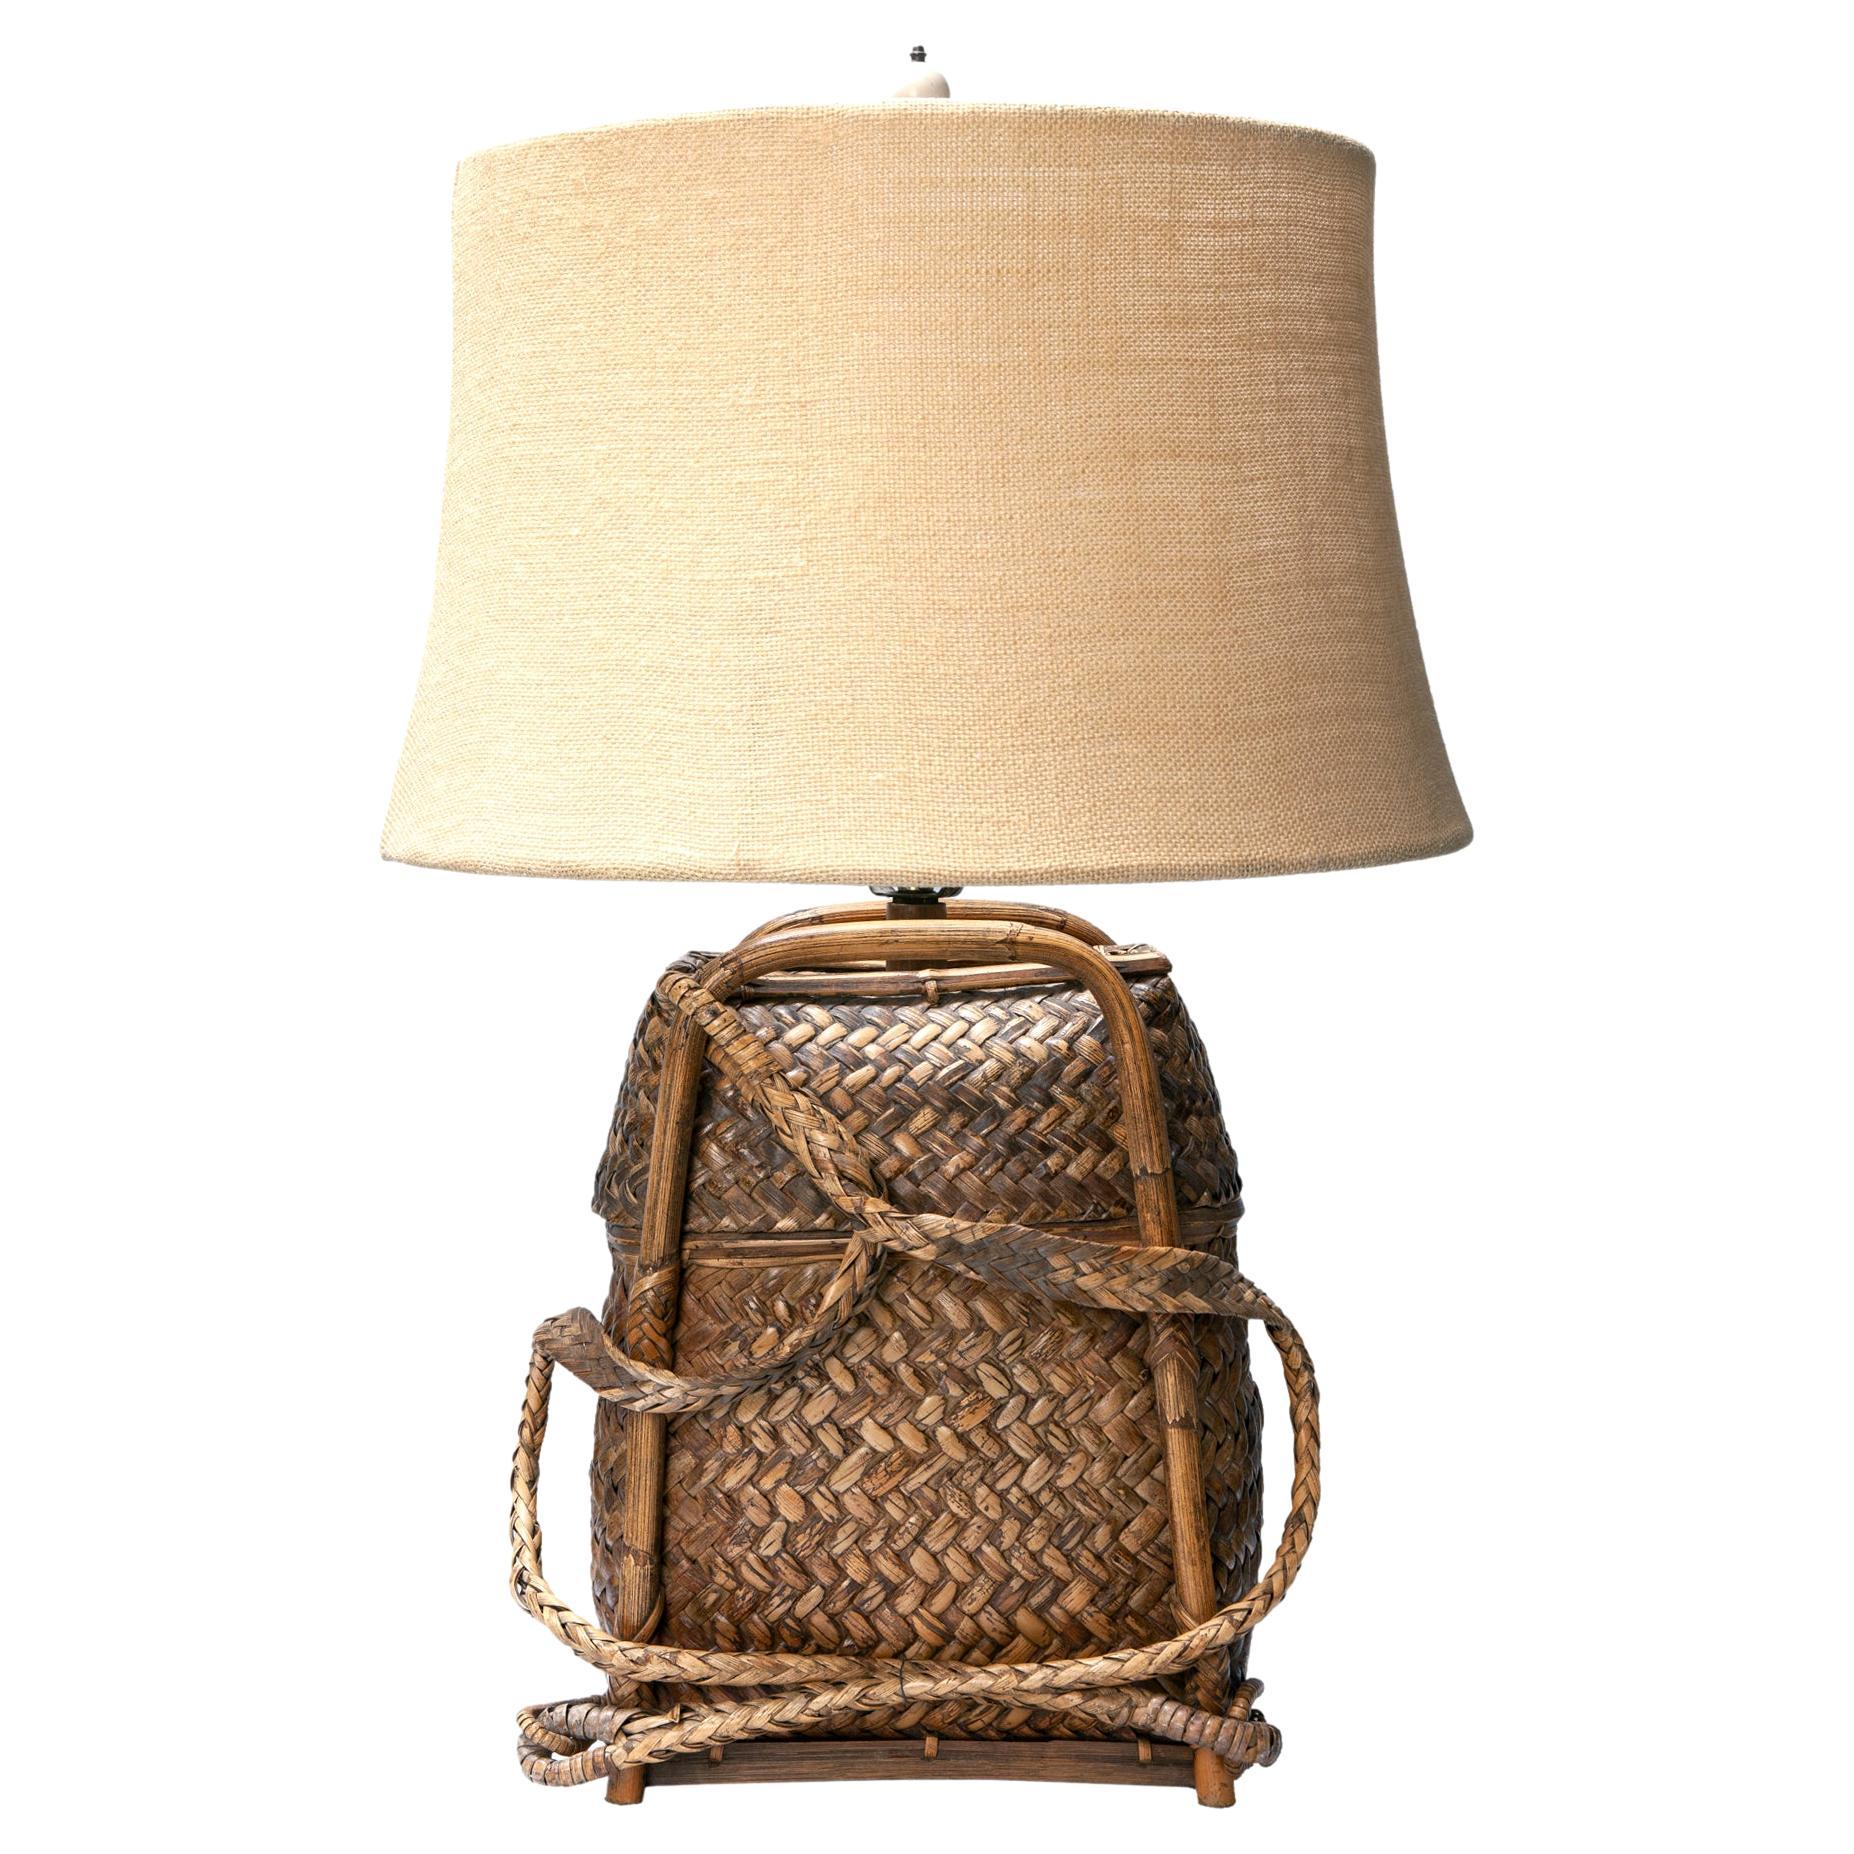 New Primitive Laundry ANTIQUE STYLE IRON LAMP Burlap Shade Electric Table Light 